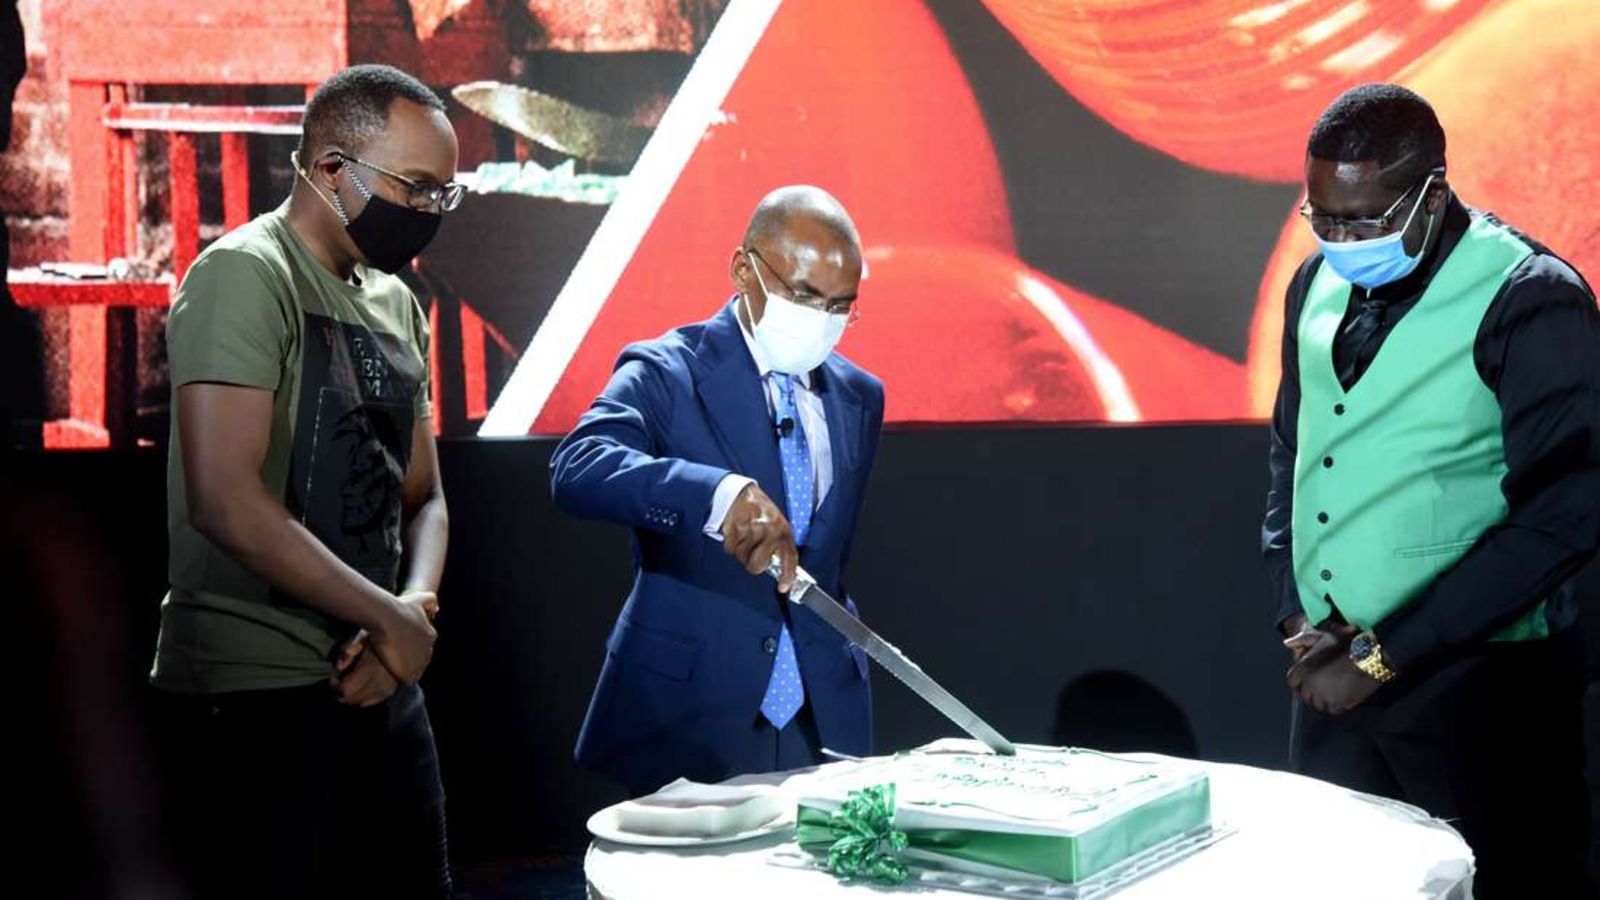 Free Data And Calls As Safaricom Celebrates 20 Years Of Transforming Lives